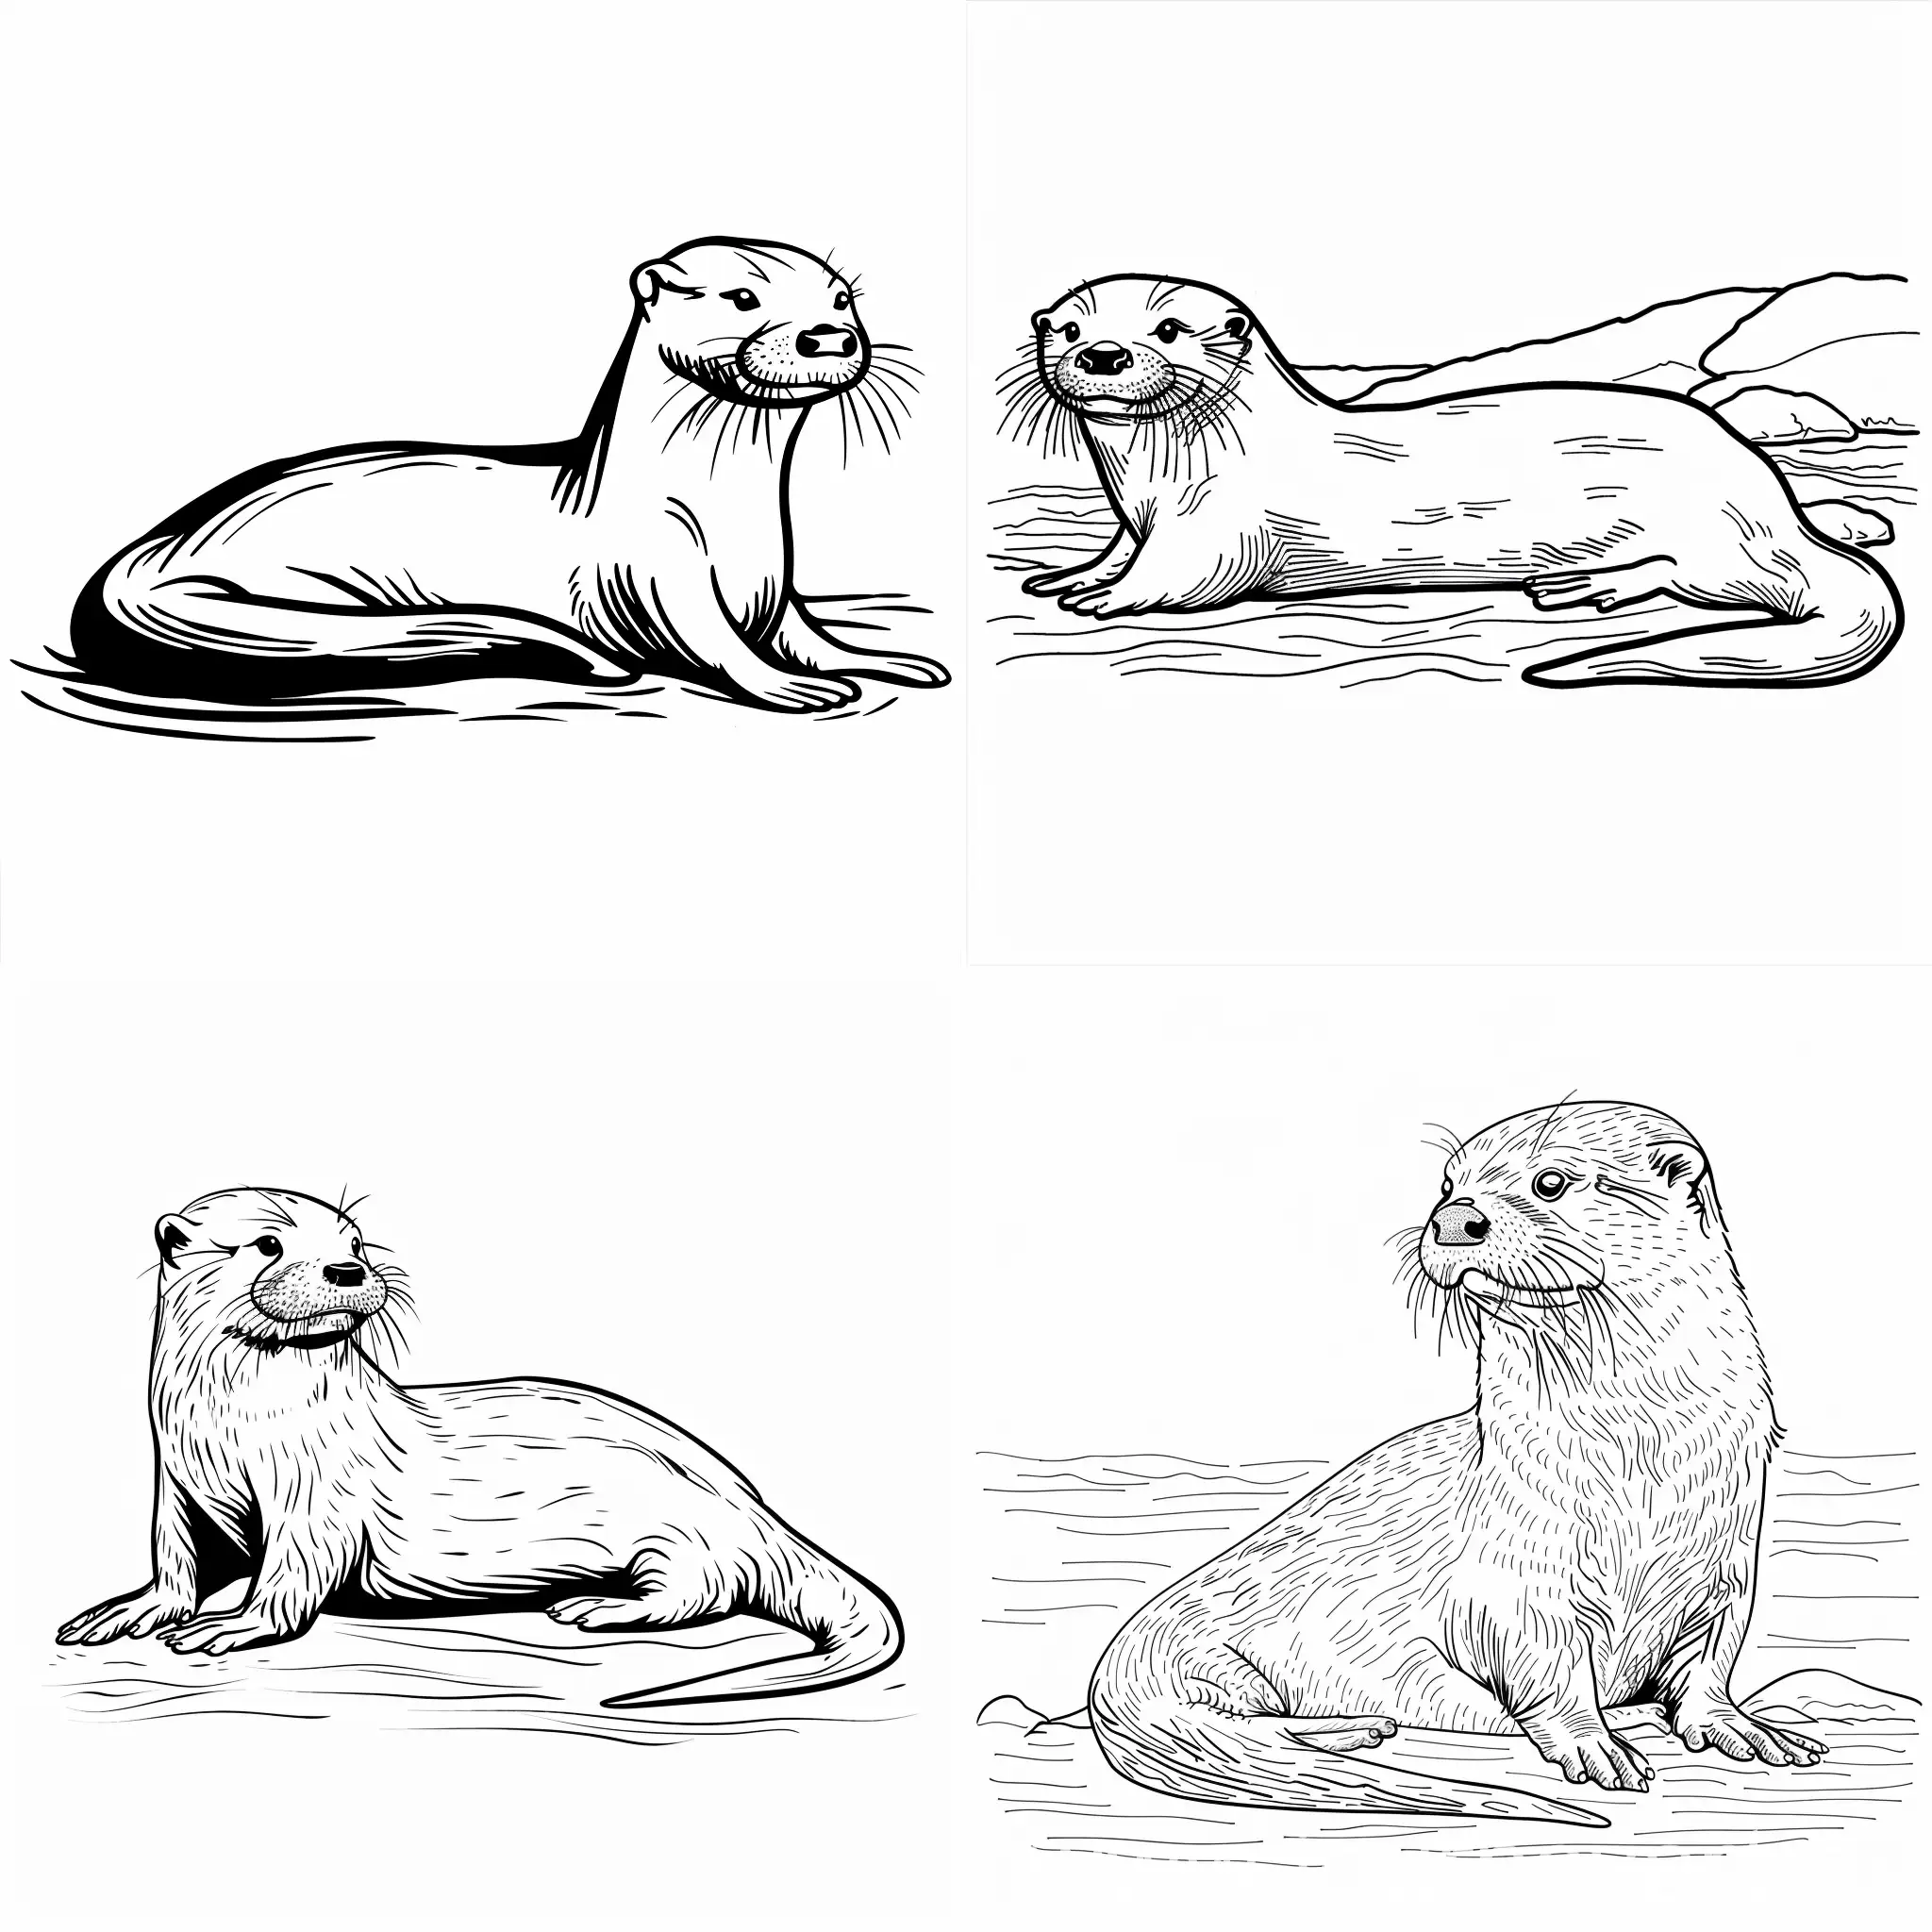 Bold-River-Otter-Coloring-Page-for-Kids-on-White-Background